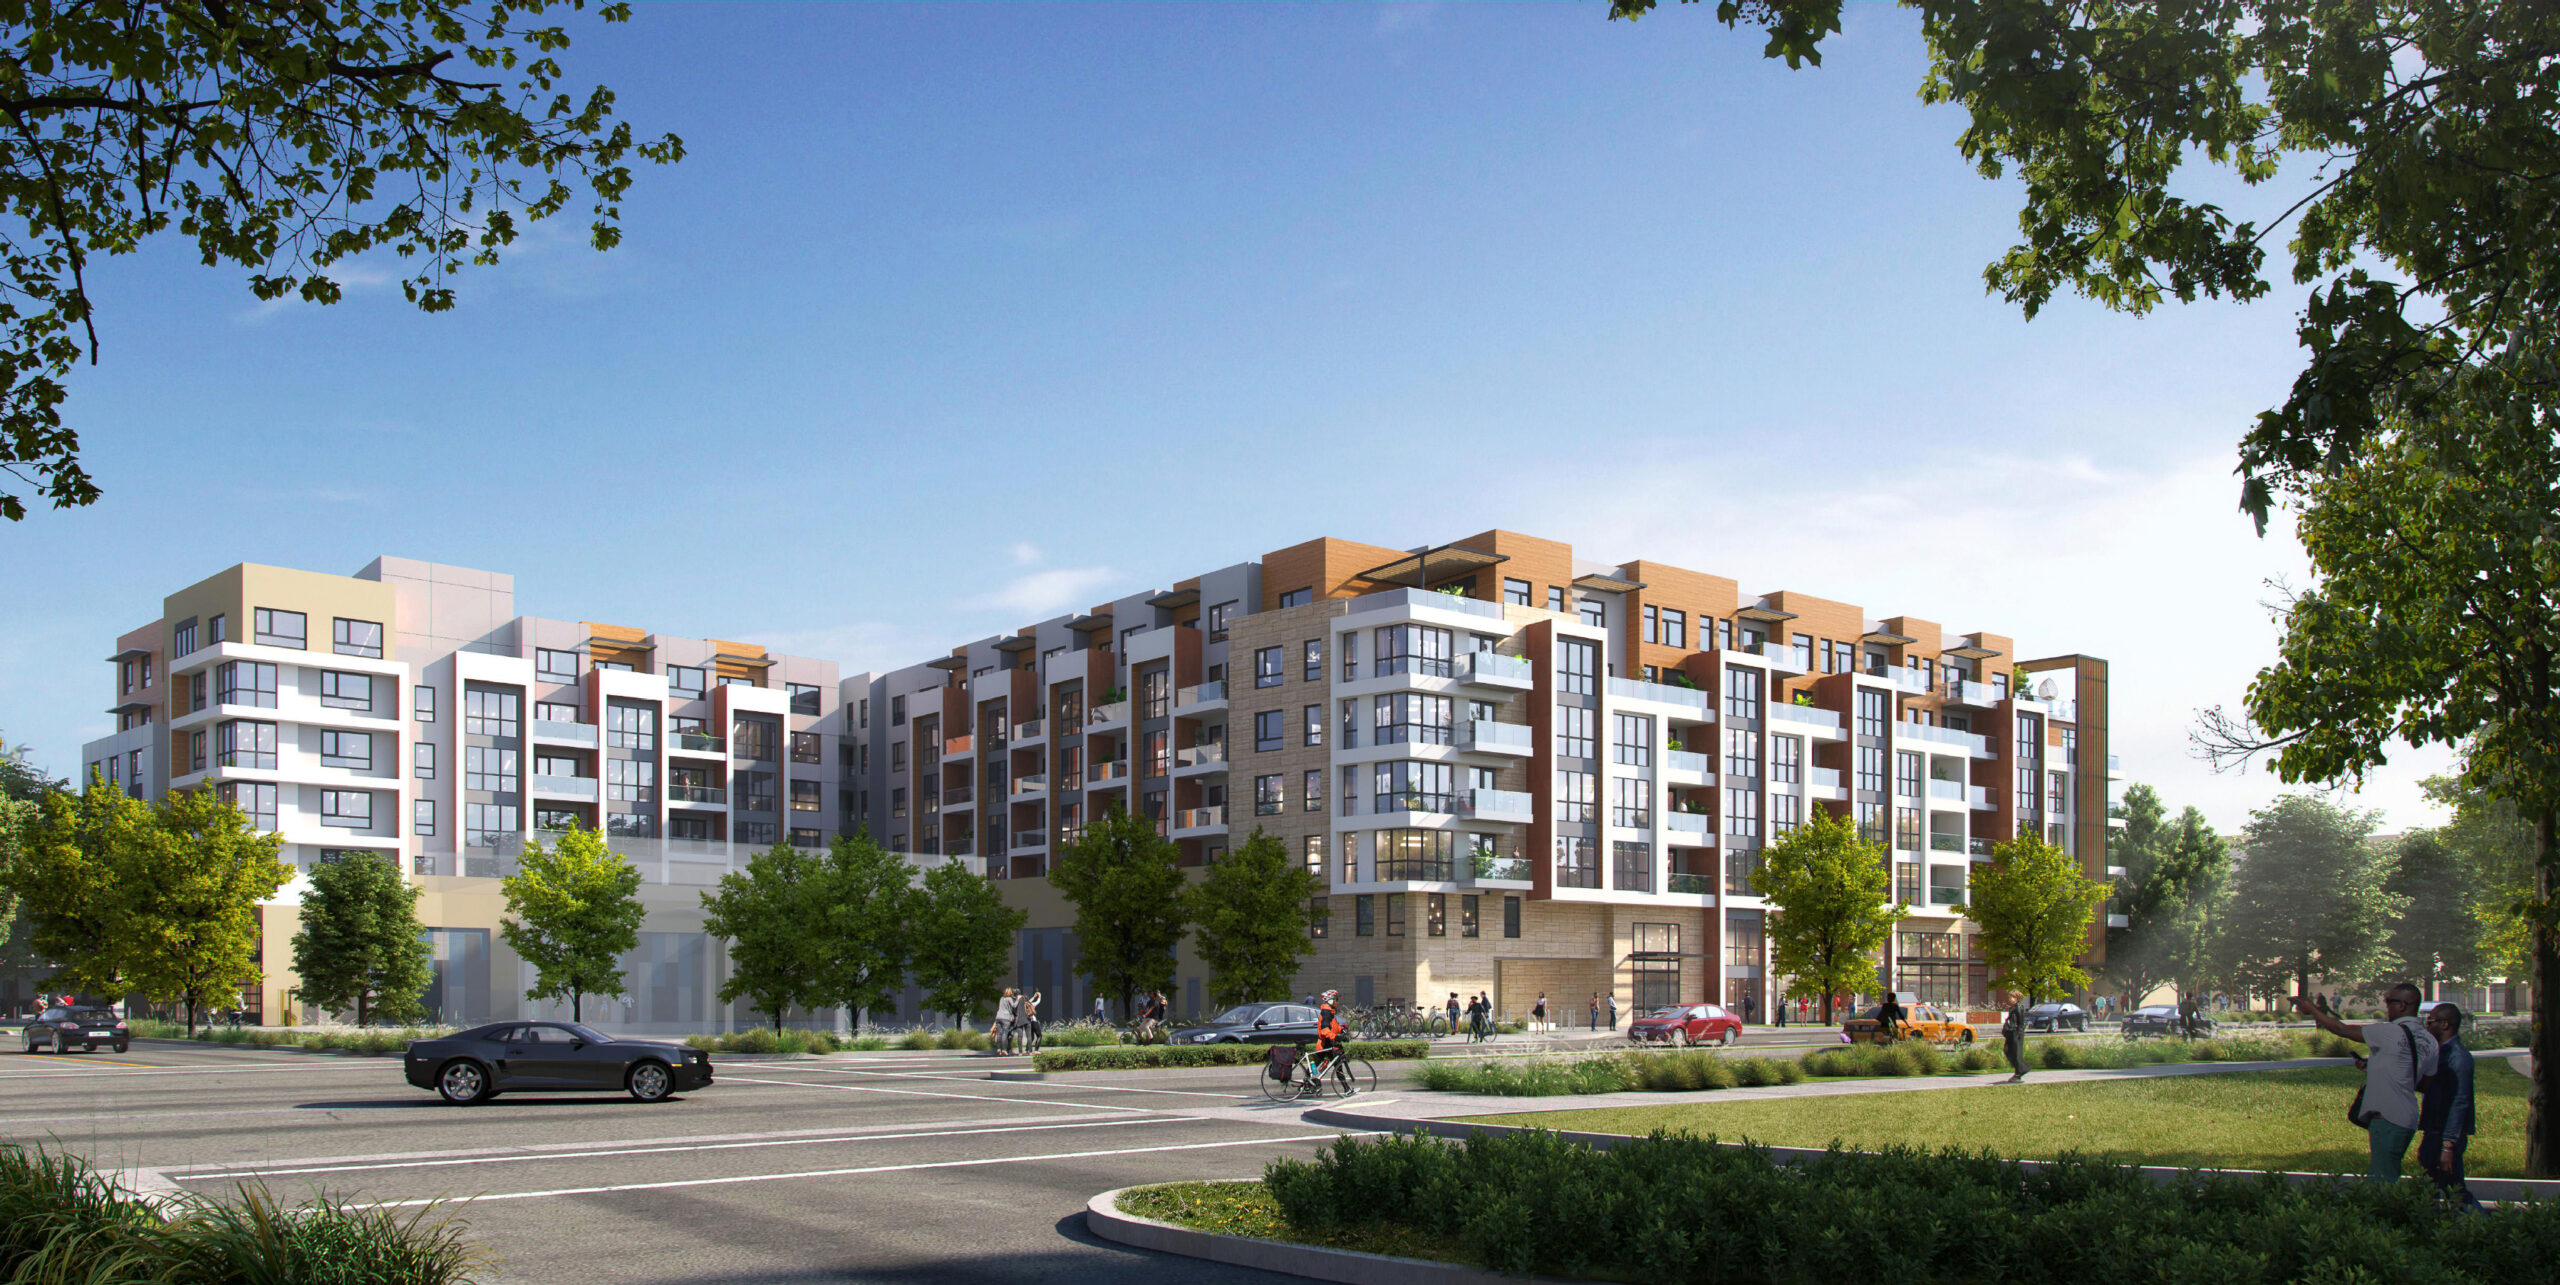 762 San Antonio Road seen from San Antonio's intersection with Leghorn Street, rendering by Studio T-Square